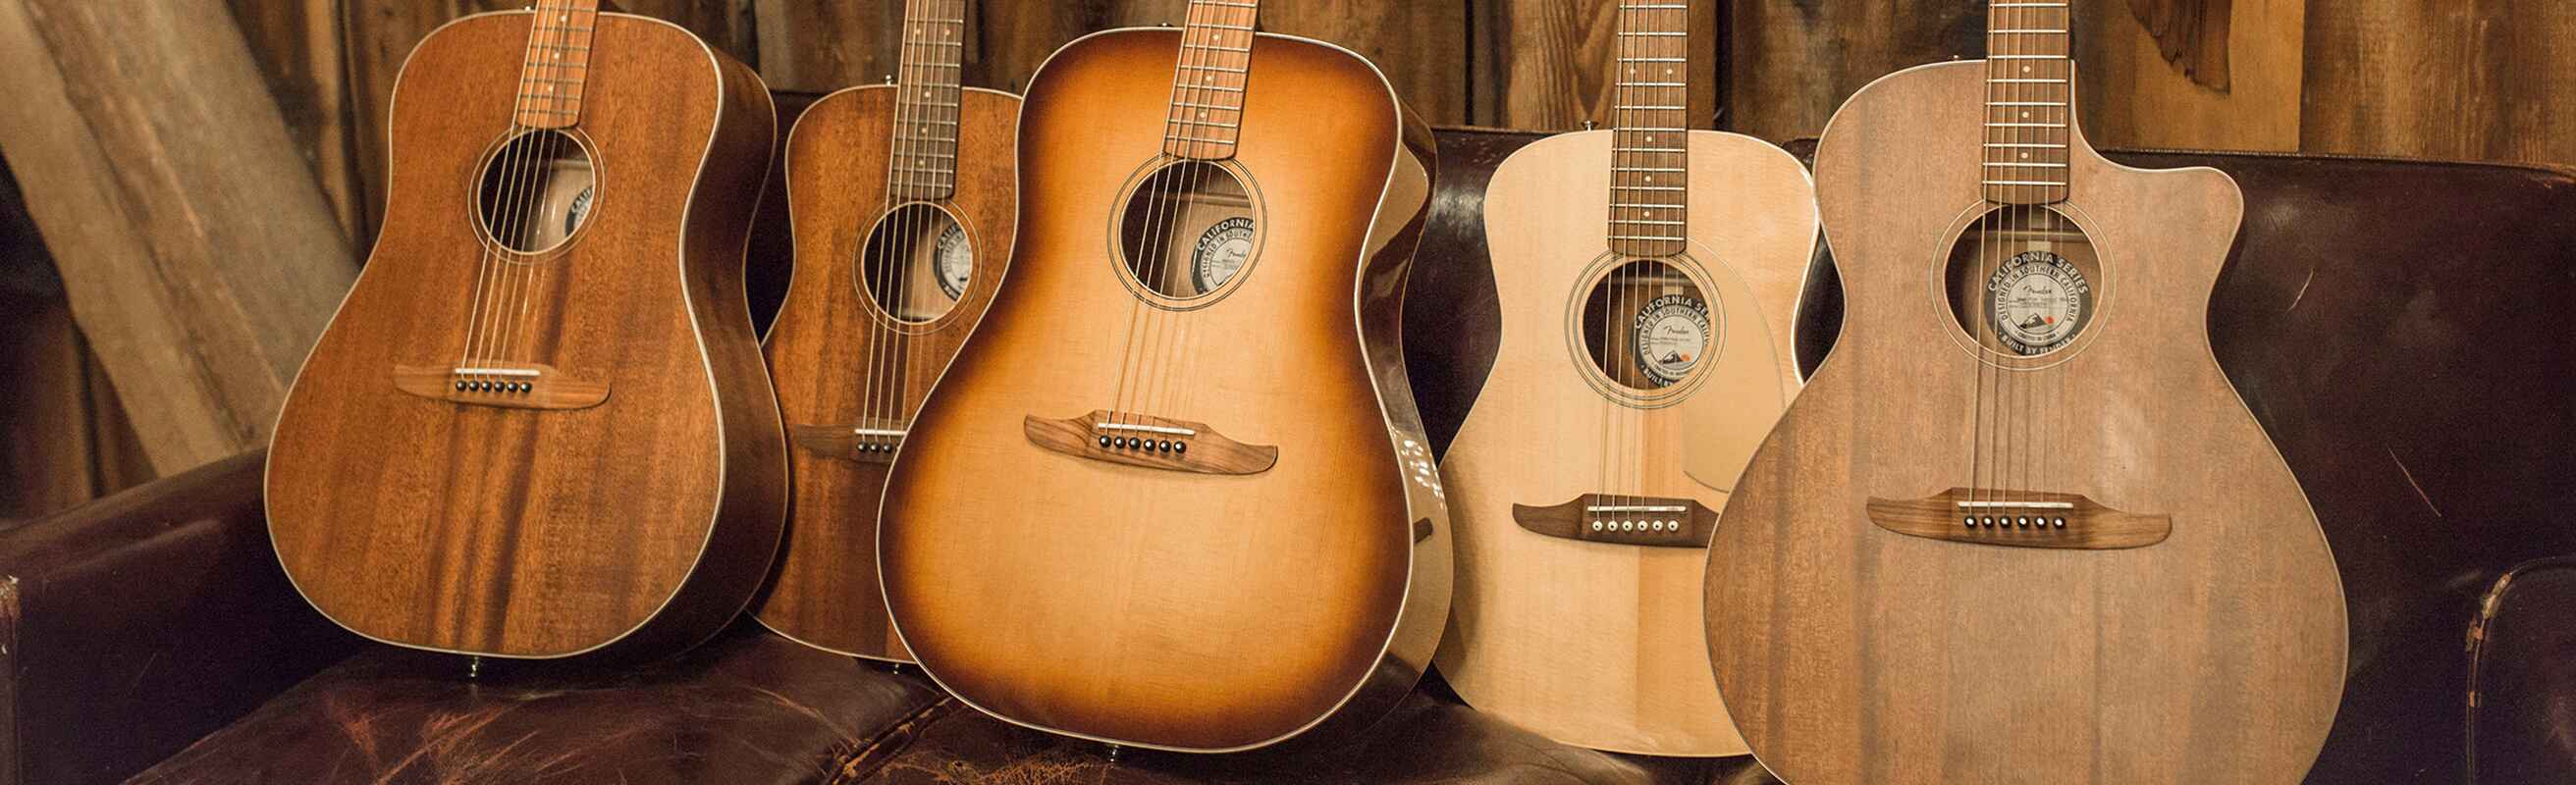 what-is-a-good-first-acoustic-guitar-to-buy-and-start-learning